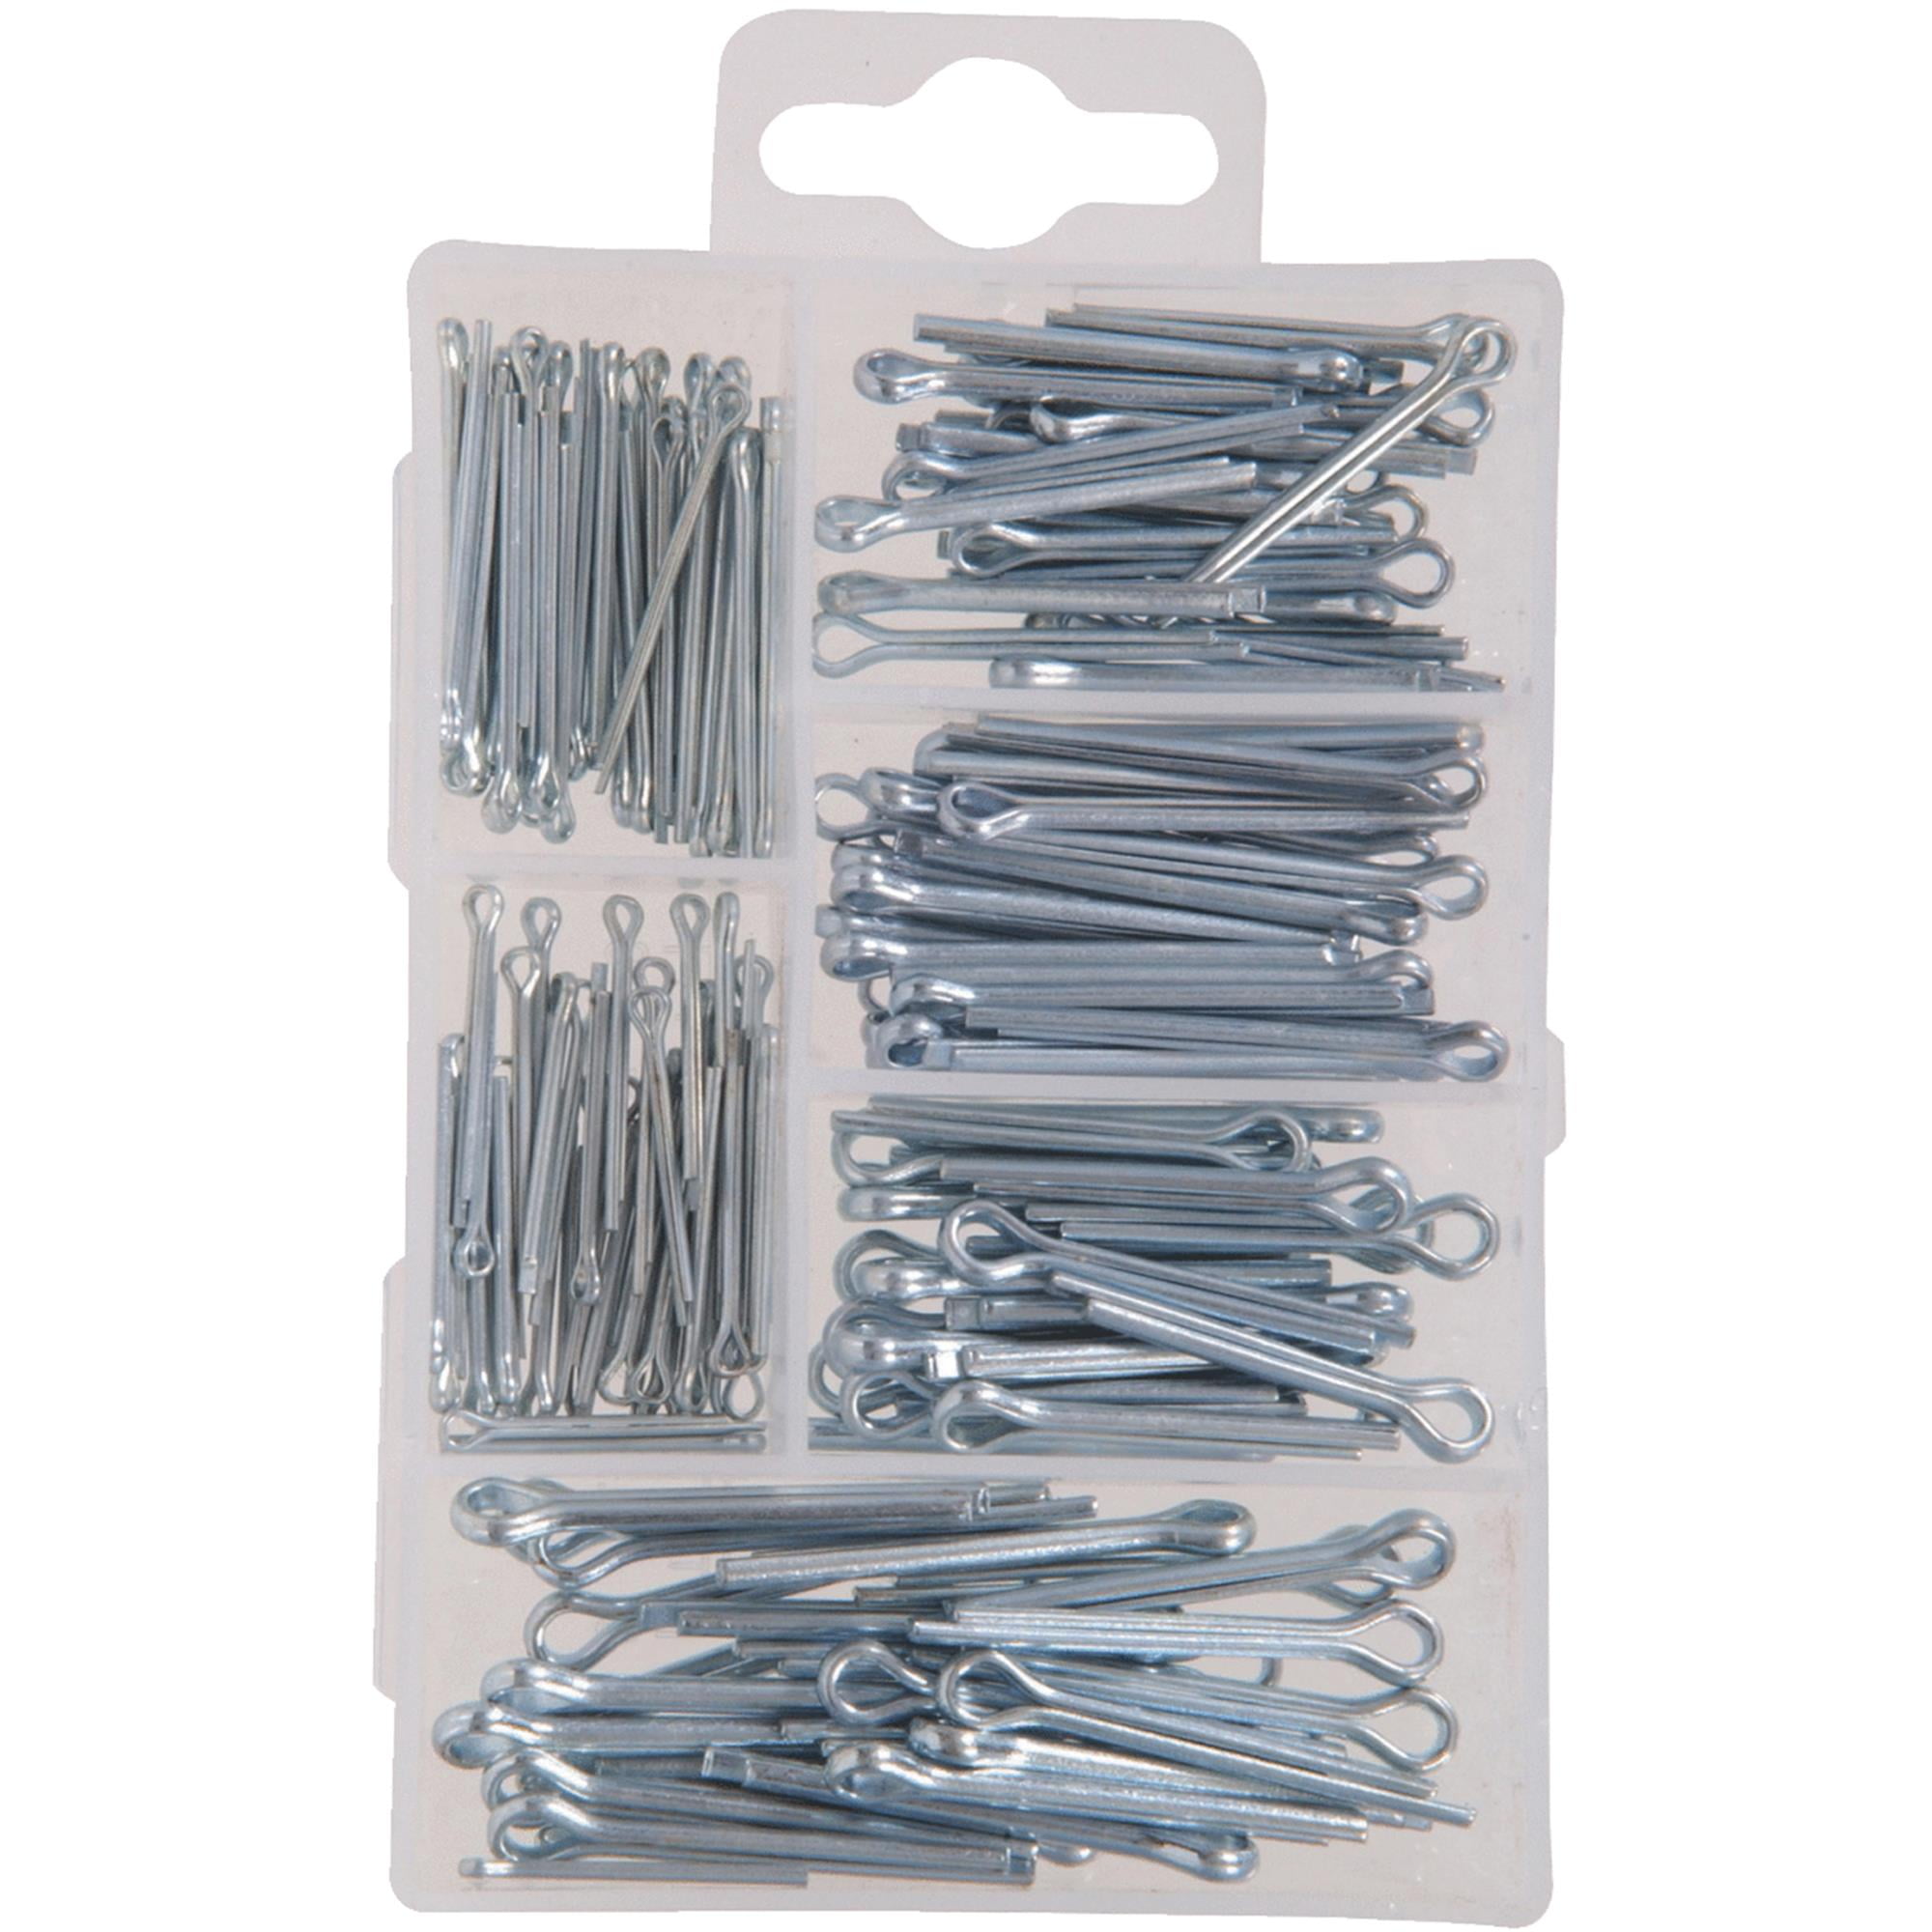 Neiko 50454A Cotter Pin Assortment Kit with Fastener Clip Key and Large Storage 